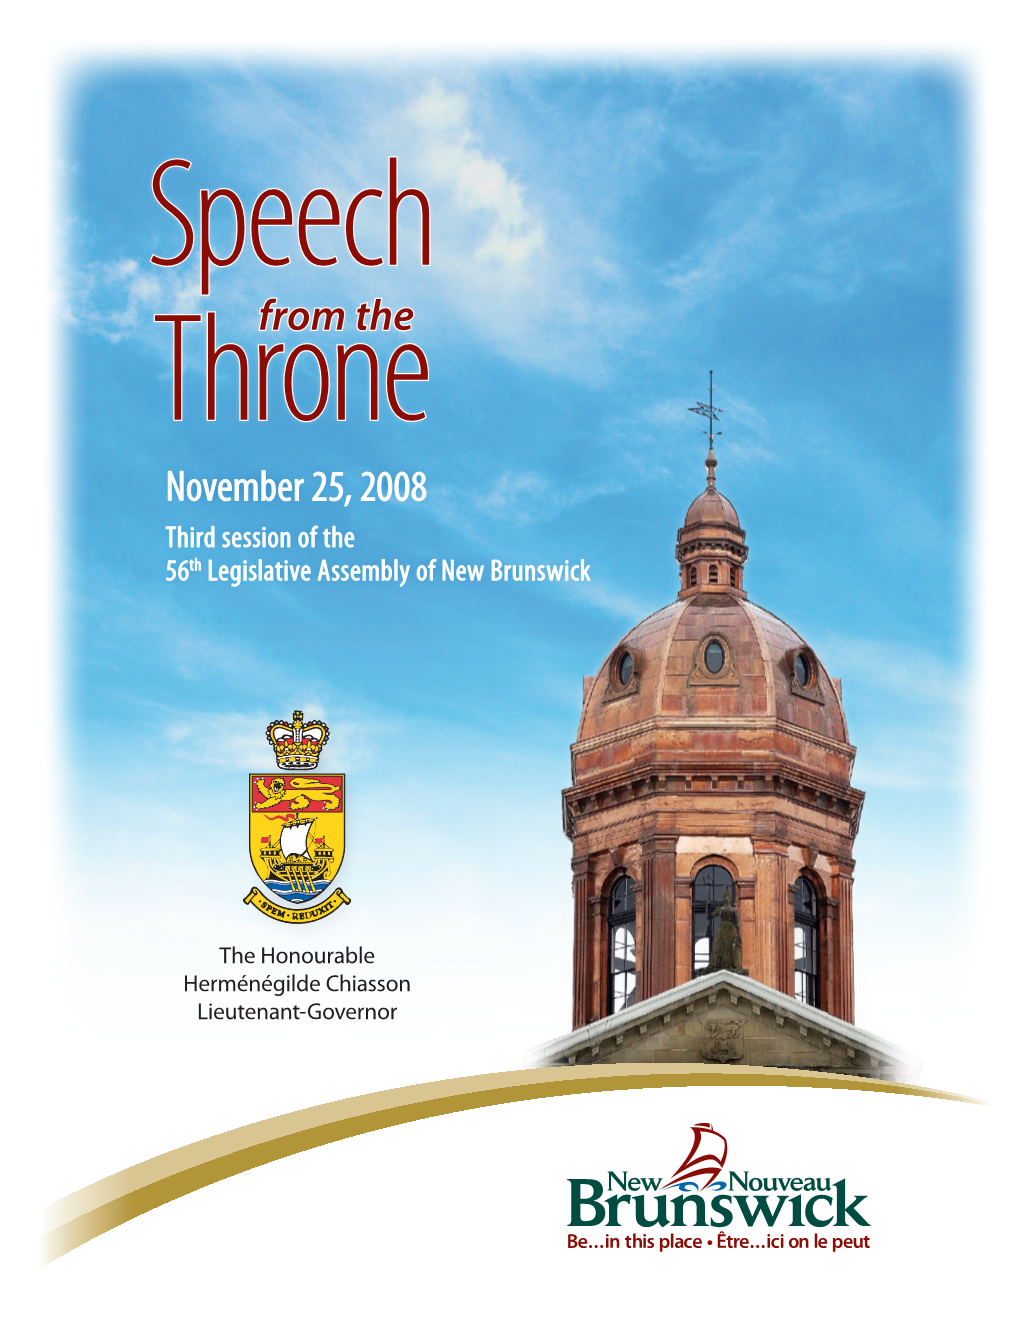 From the November 25, 2008 Third Session of the 56Th Legislative Assembly of New Brunswick